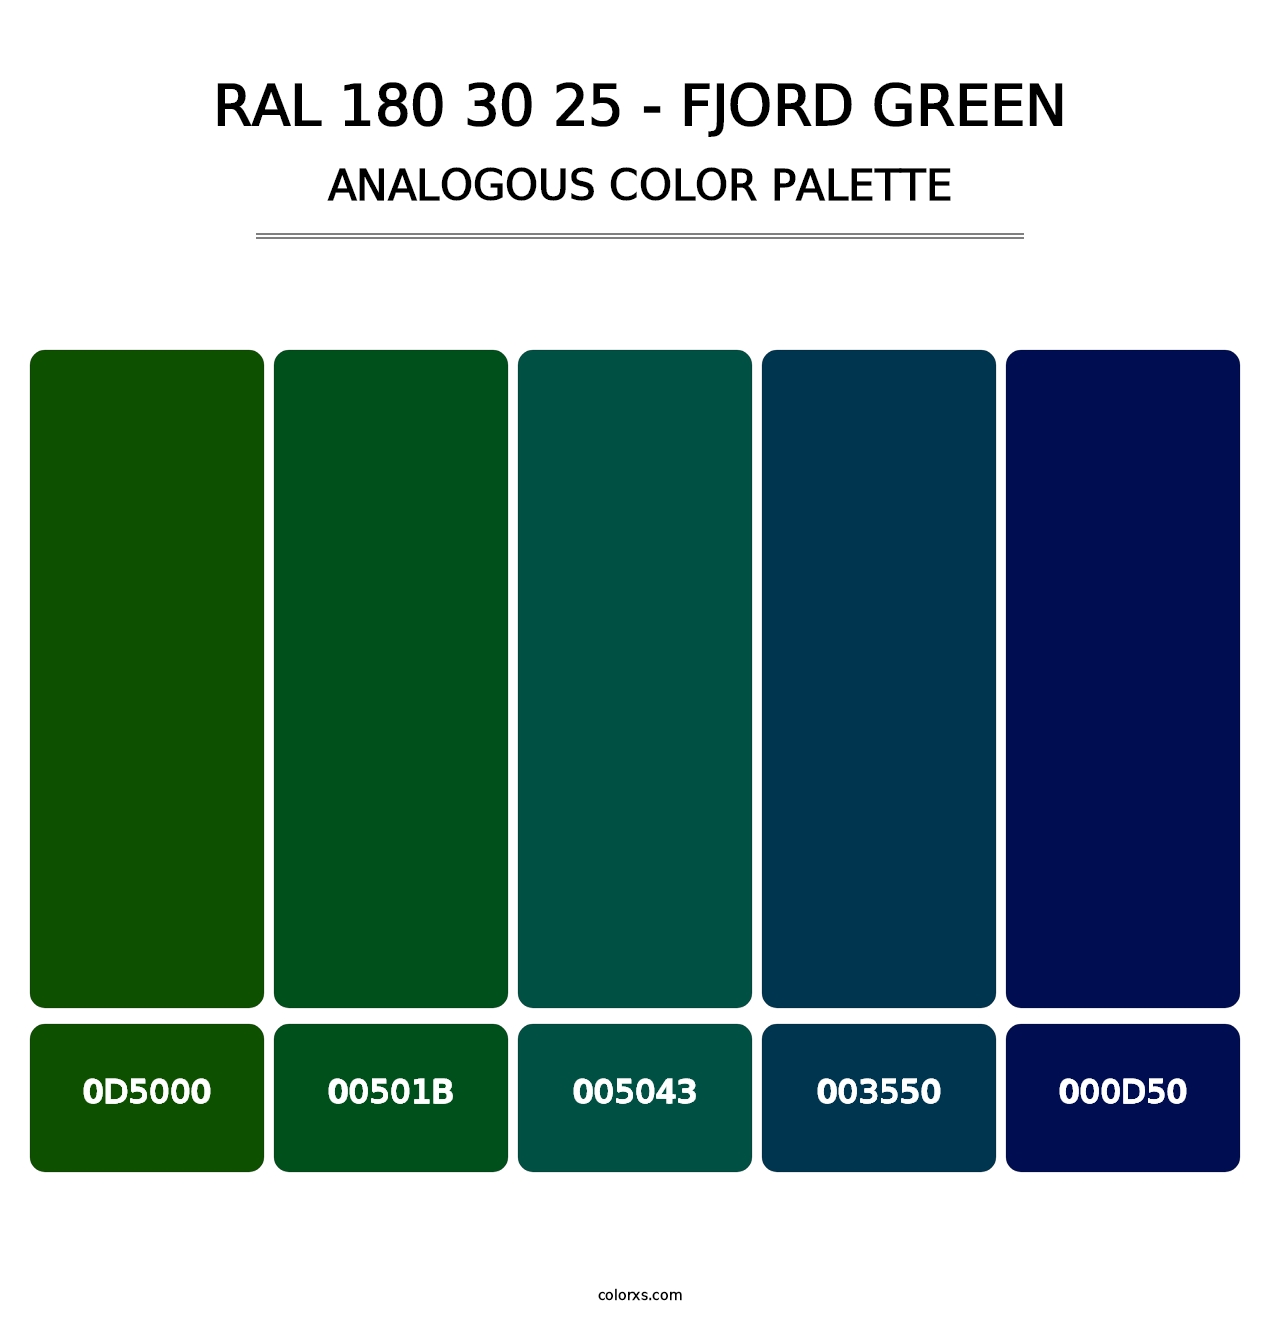 RAL 180 30 25 - Fjord Green - Analogous Color Palette